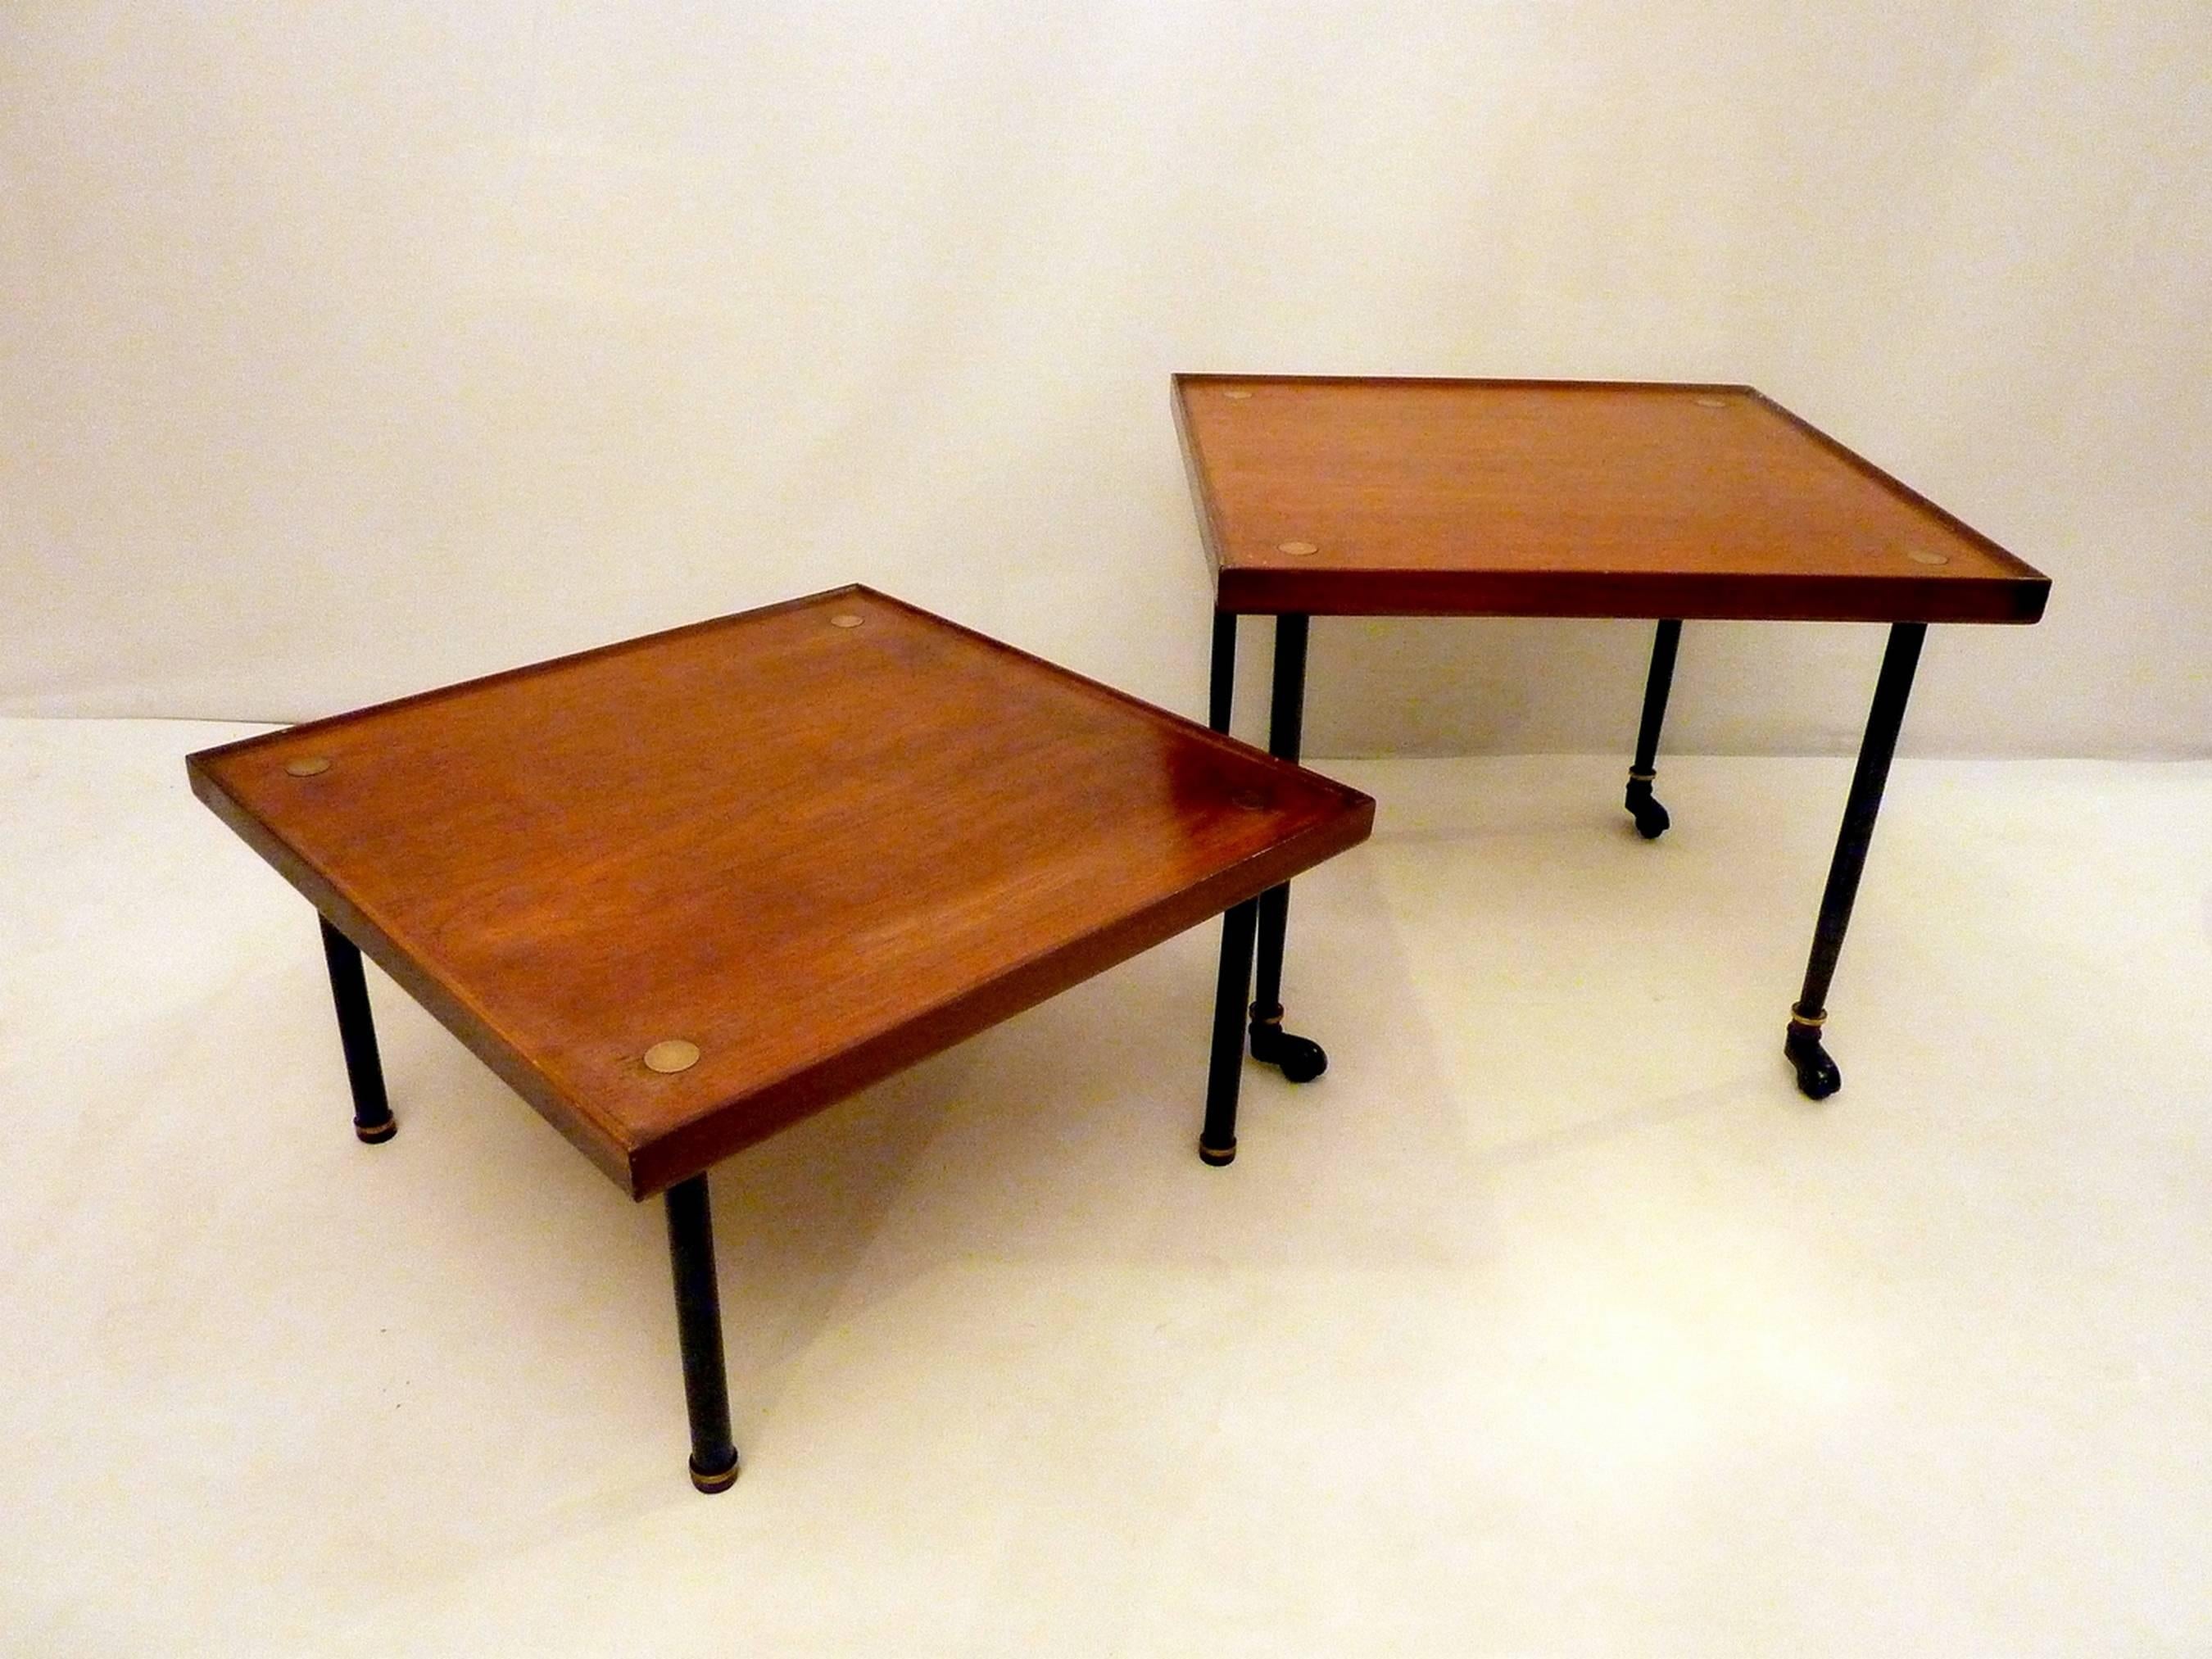 Modern Melchiorre Bega Teal Side Tables Produced by Klan, Italy